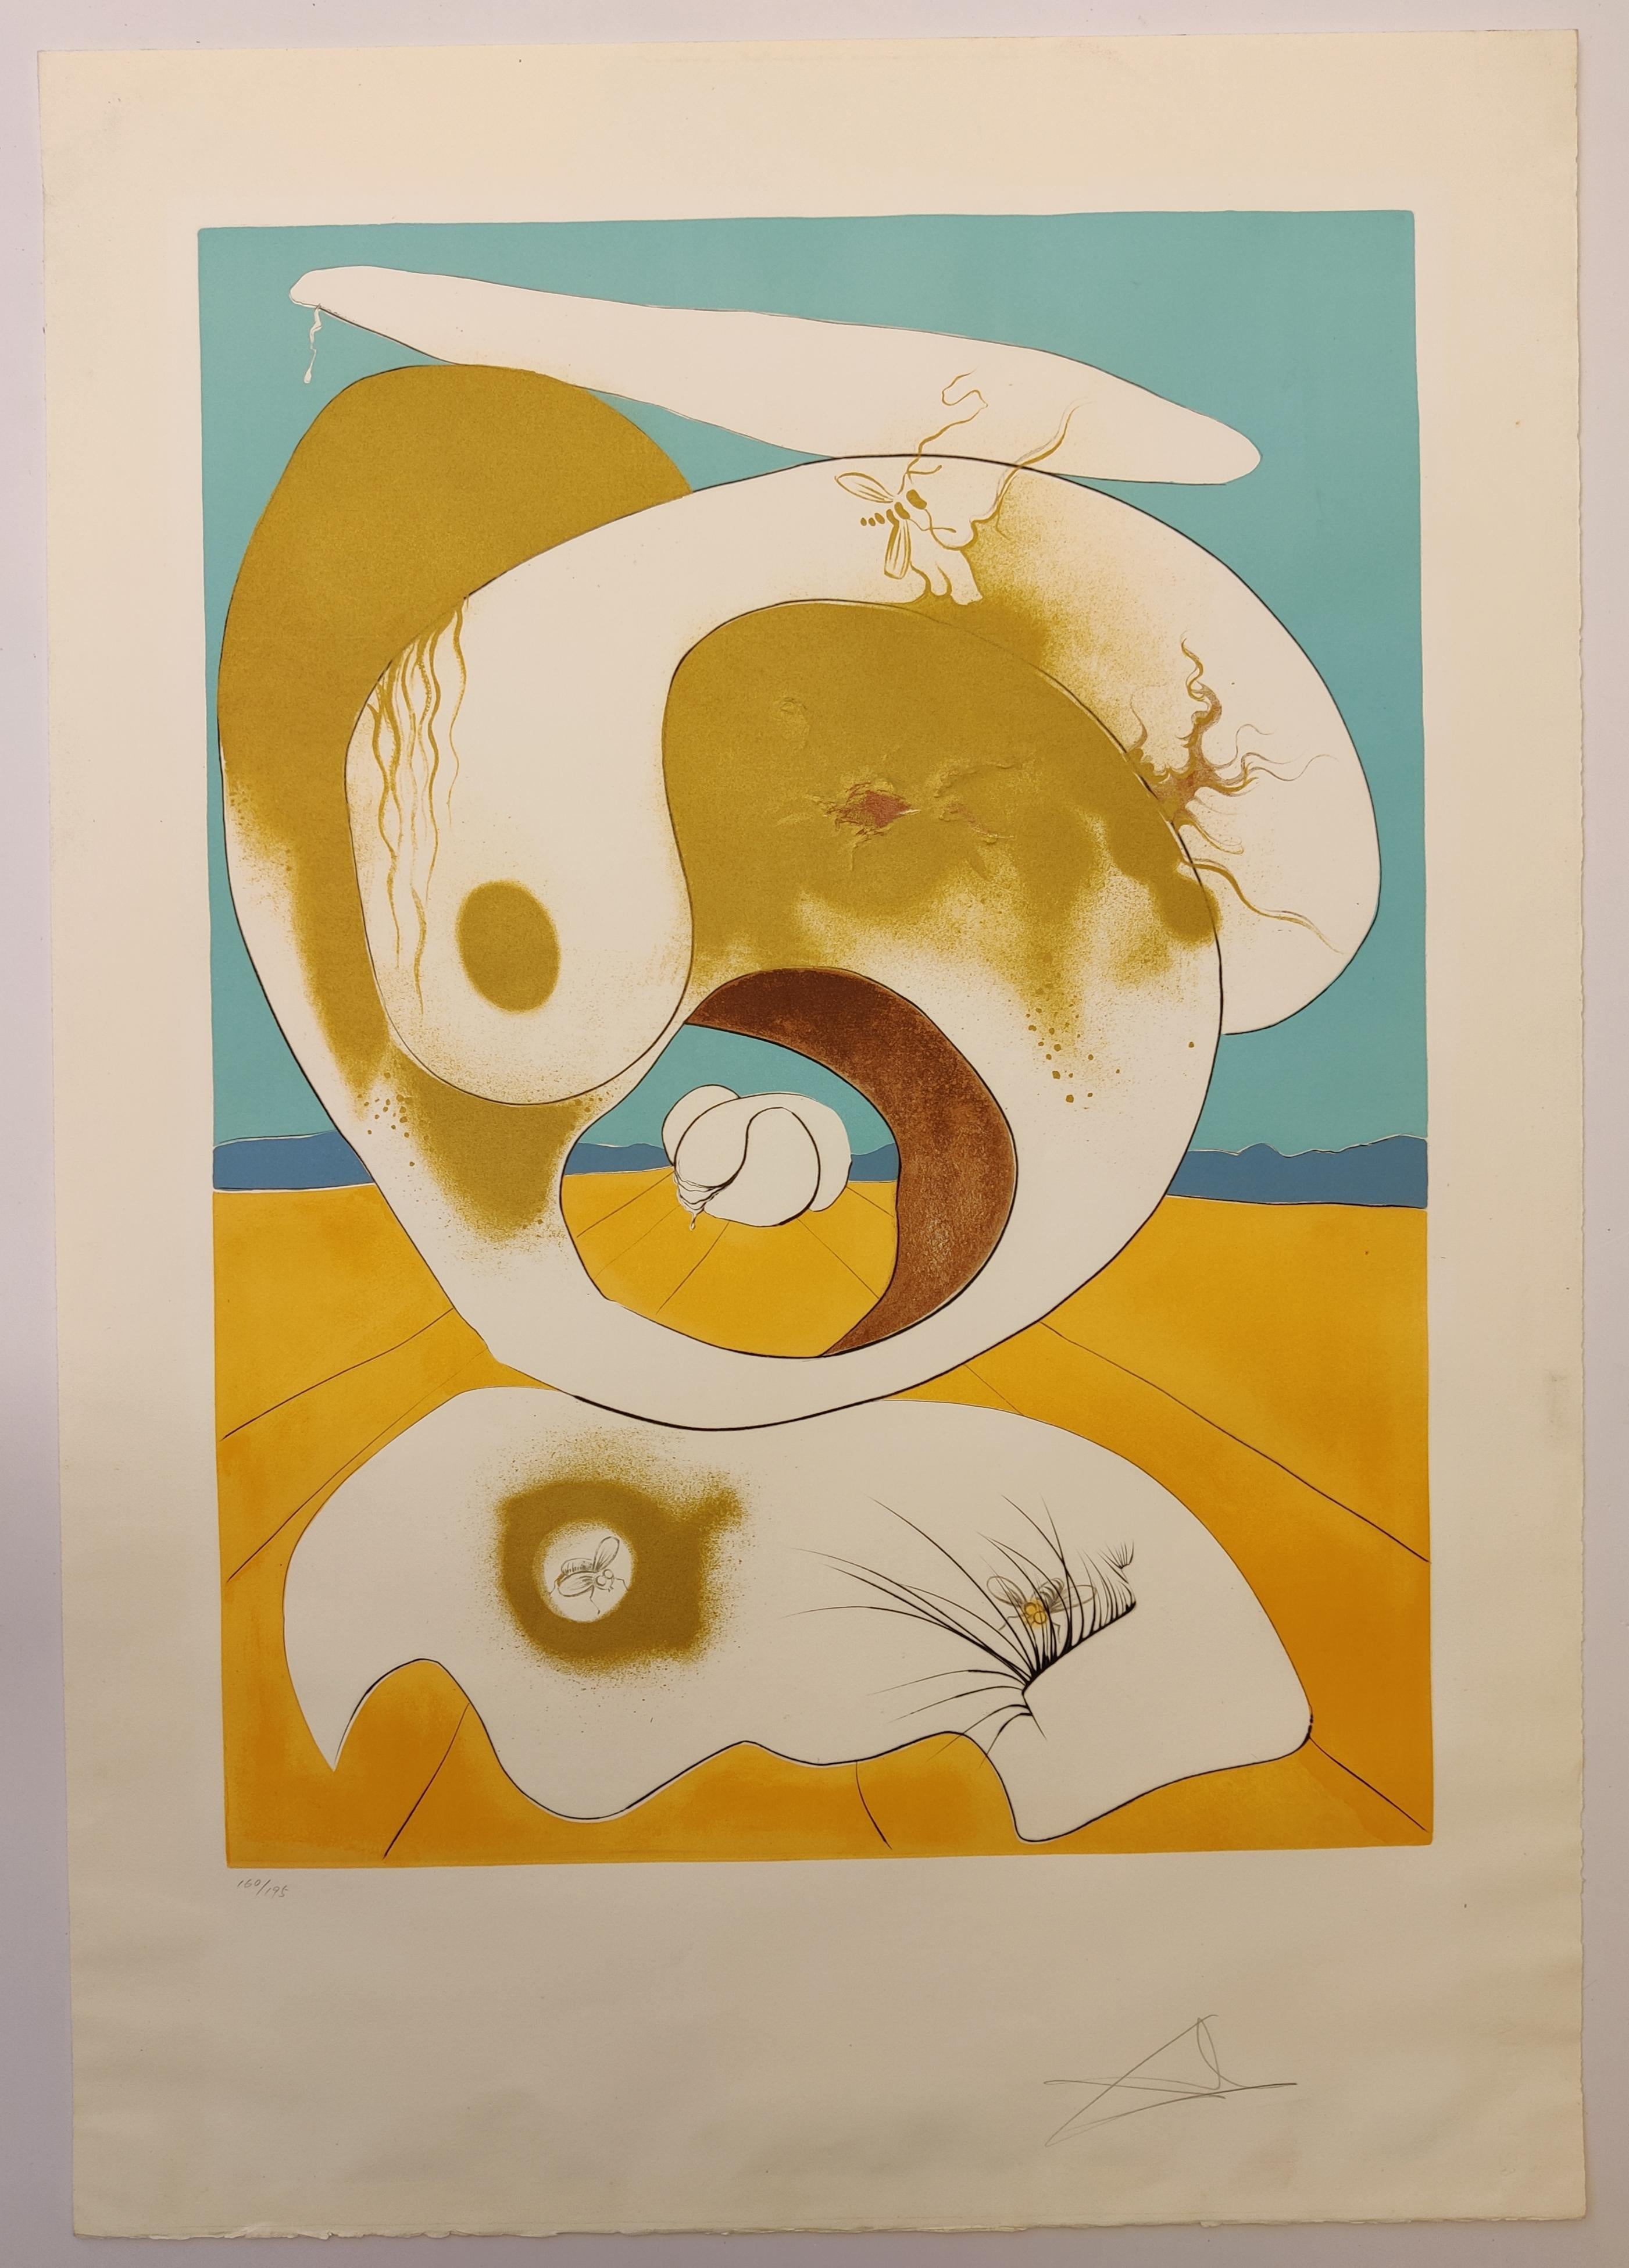 Salvador Dali -- Planetary and scatological visionlithograph - Print by Salvador Dalí